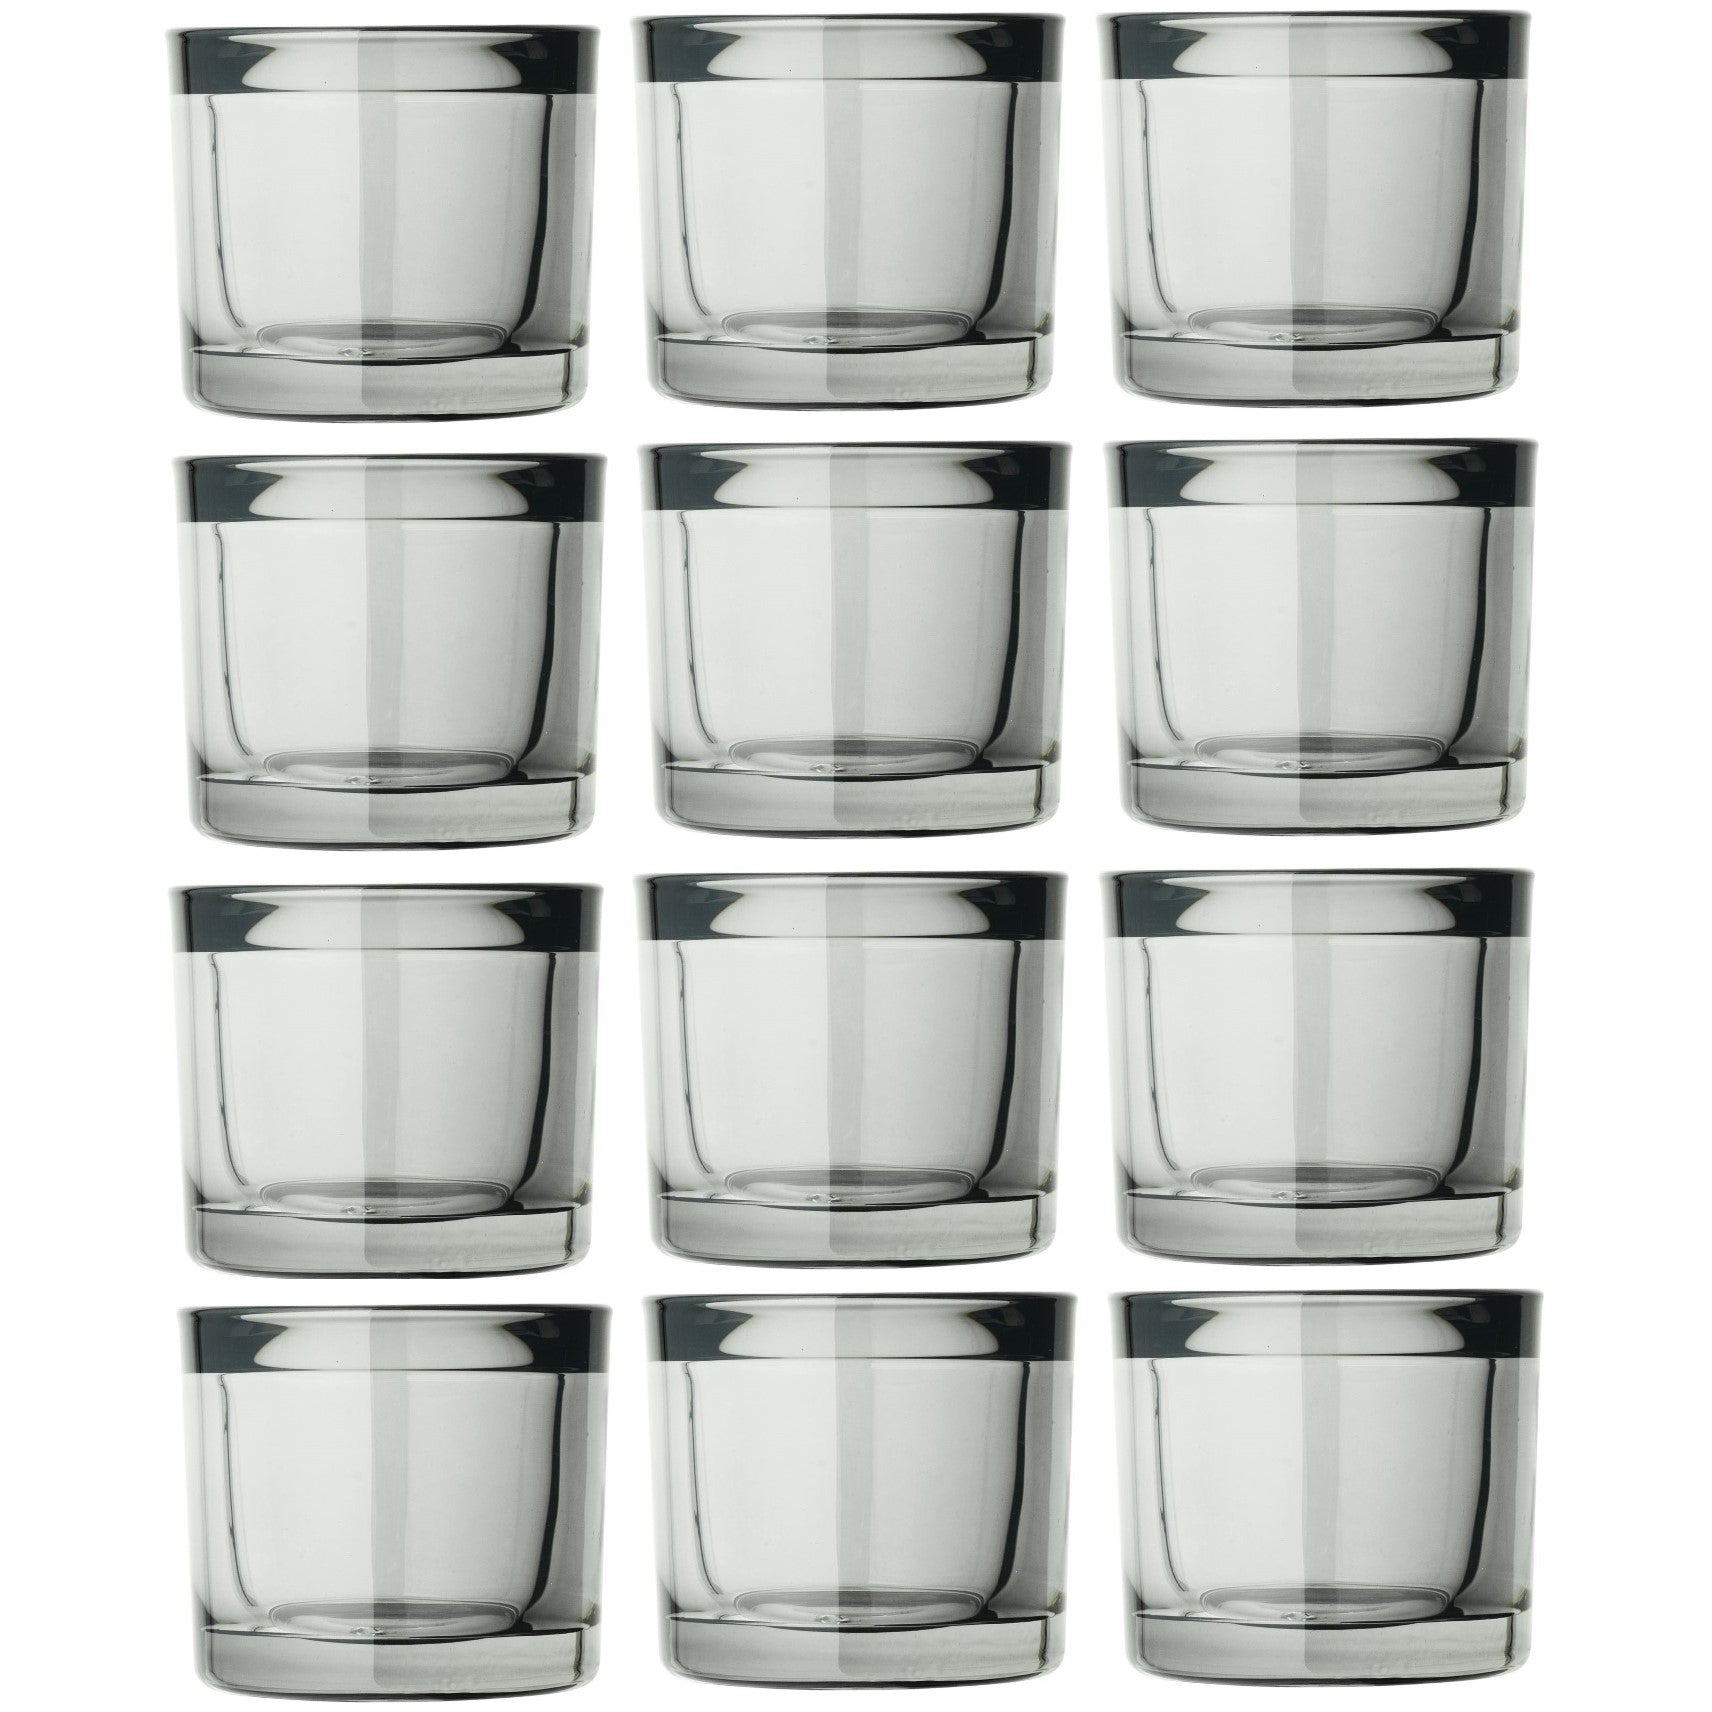 blomus-tealight-candle-holders:-smoky-grey-tinted-glass-6.5x6cm-mimo-x12